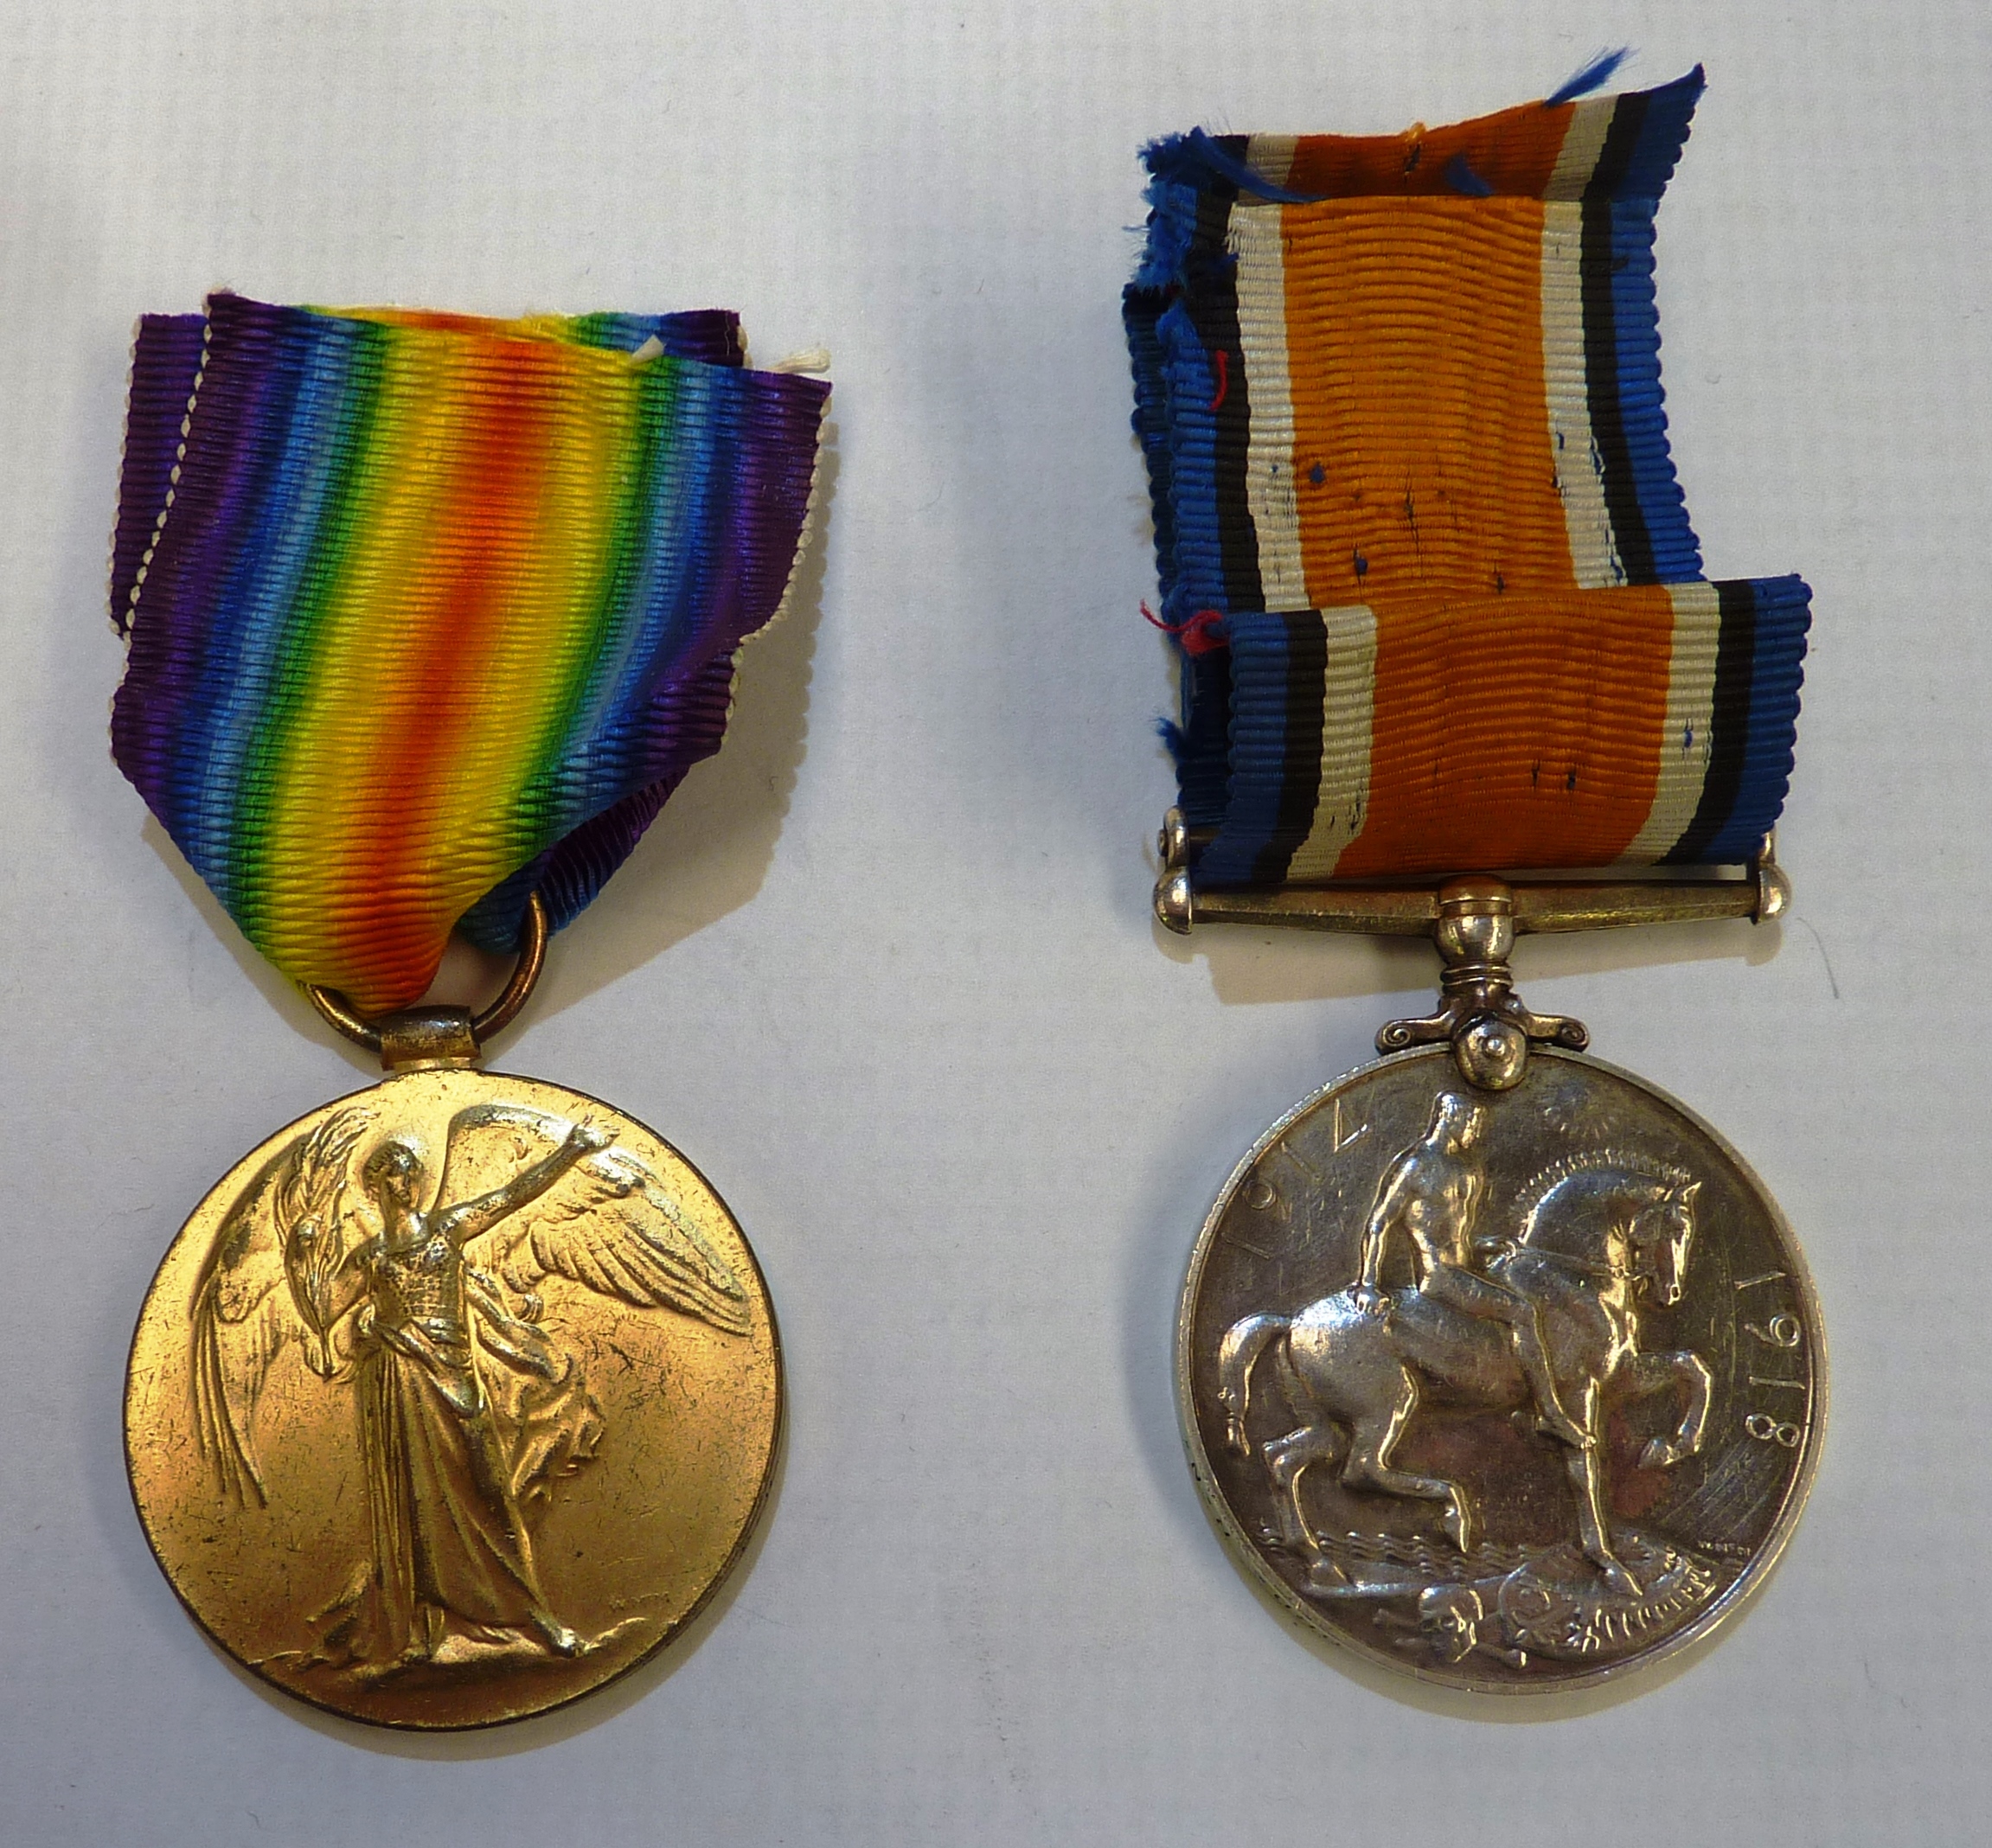 WWI pair comprising of British war medal and victory medal awarded to 'M.20410 A.MARSDEN ORD.R.